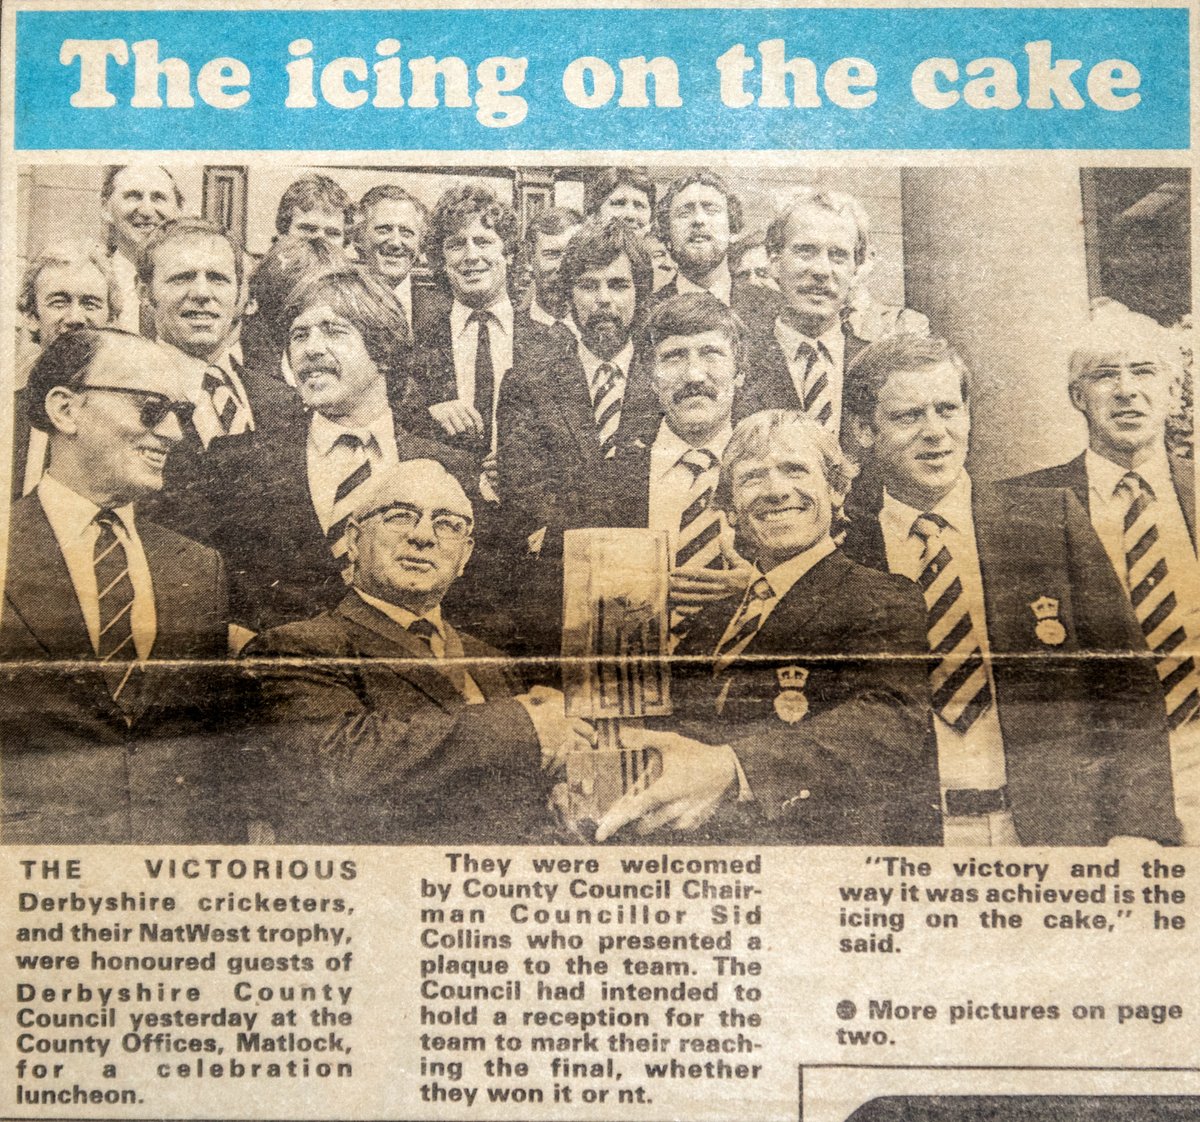 Derbyshire @DerbyshireCCC in Print - Day 299 Derbyshire cricket managed to get on the front page of the Derby Telegraph after their victorious NatWest Trophy campaign in 1981 ended with a trip to the County Offices at Matlock...